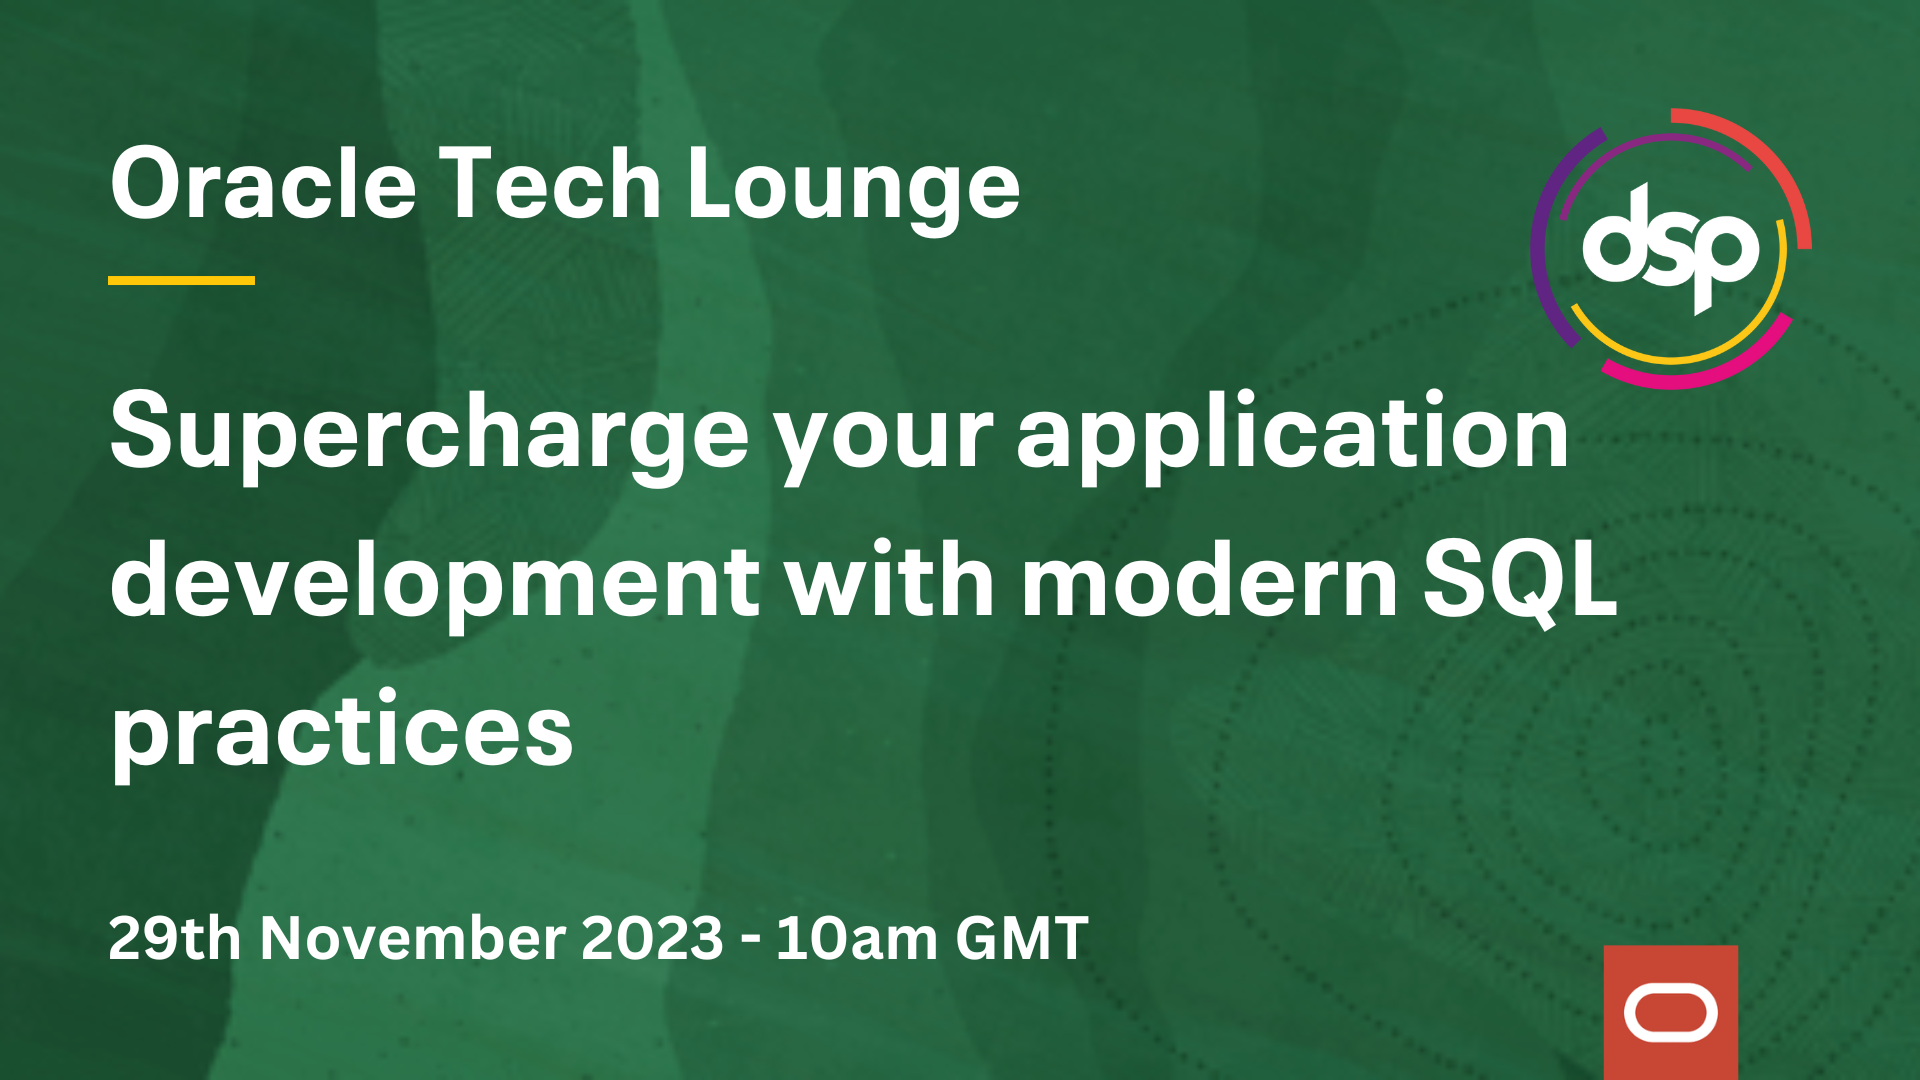 Supercharge your application development with modern SQL practices